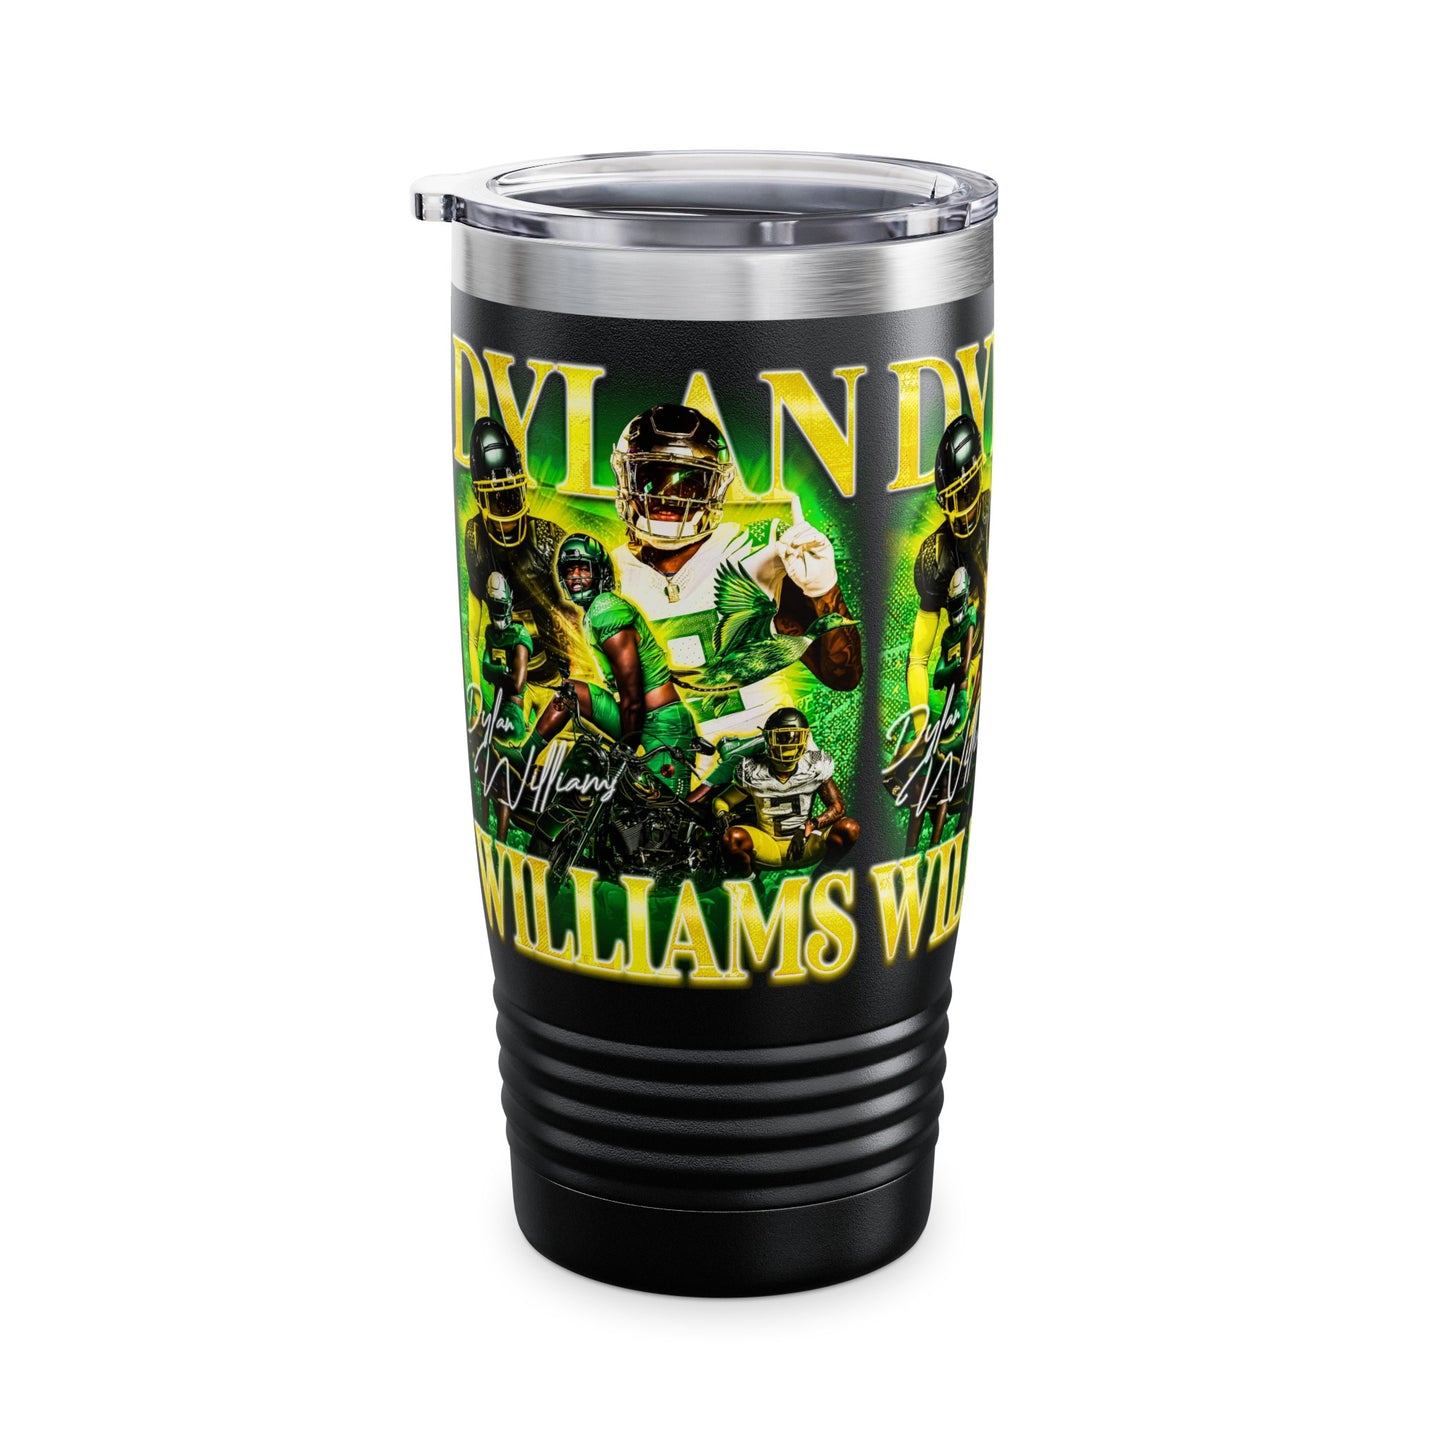 DYLAN WILLIAMS STAINLESS STEEL TUMBLER